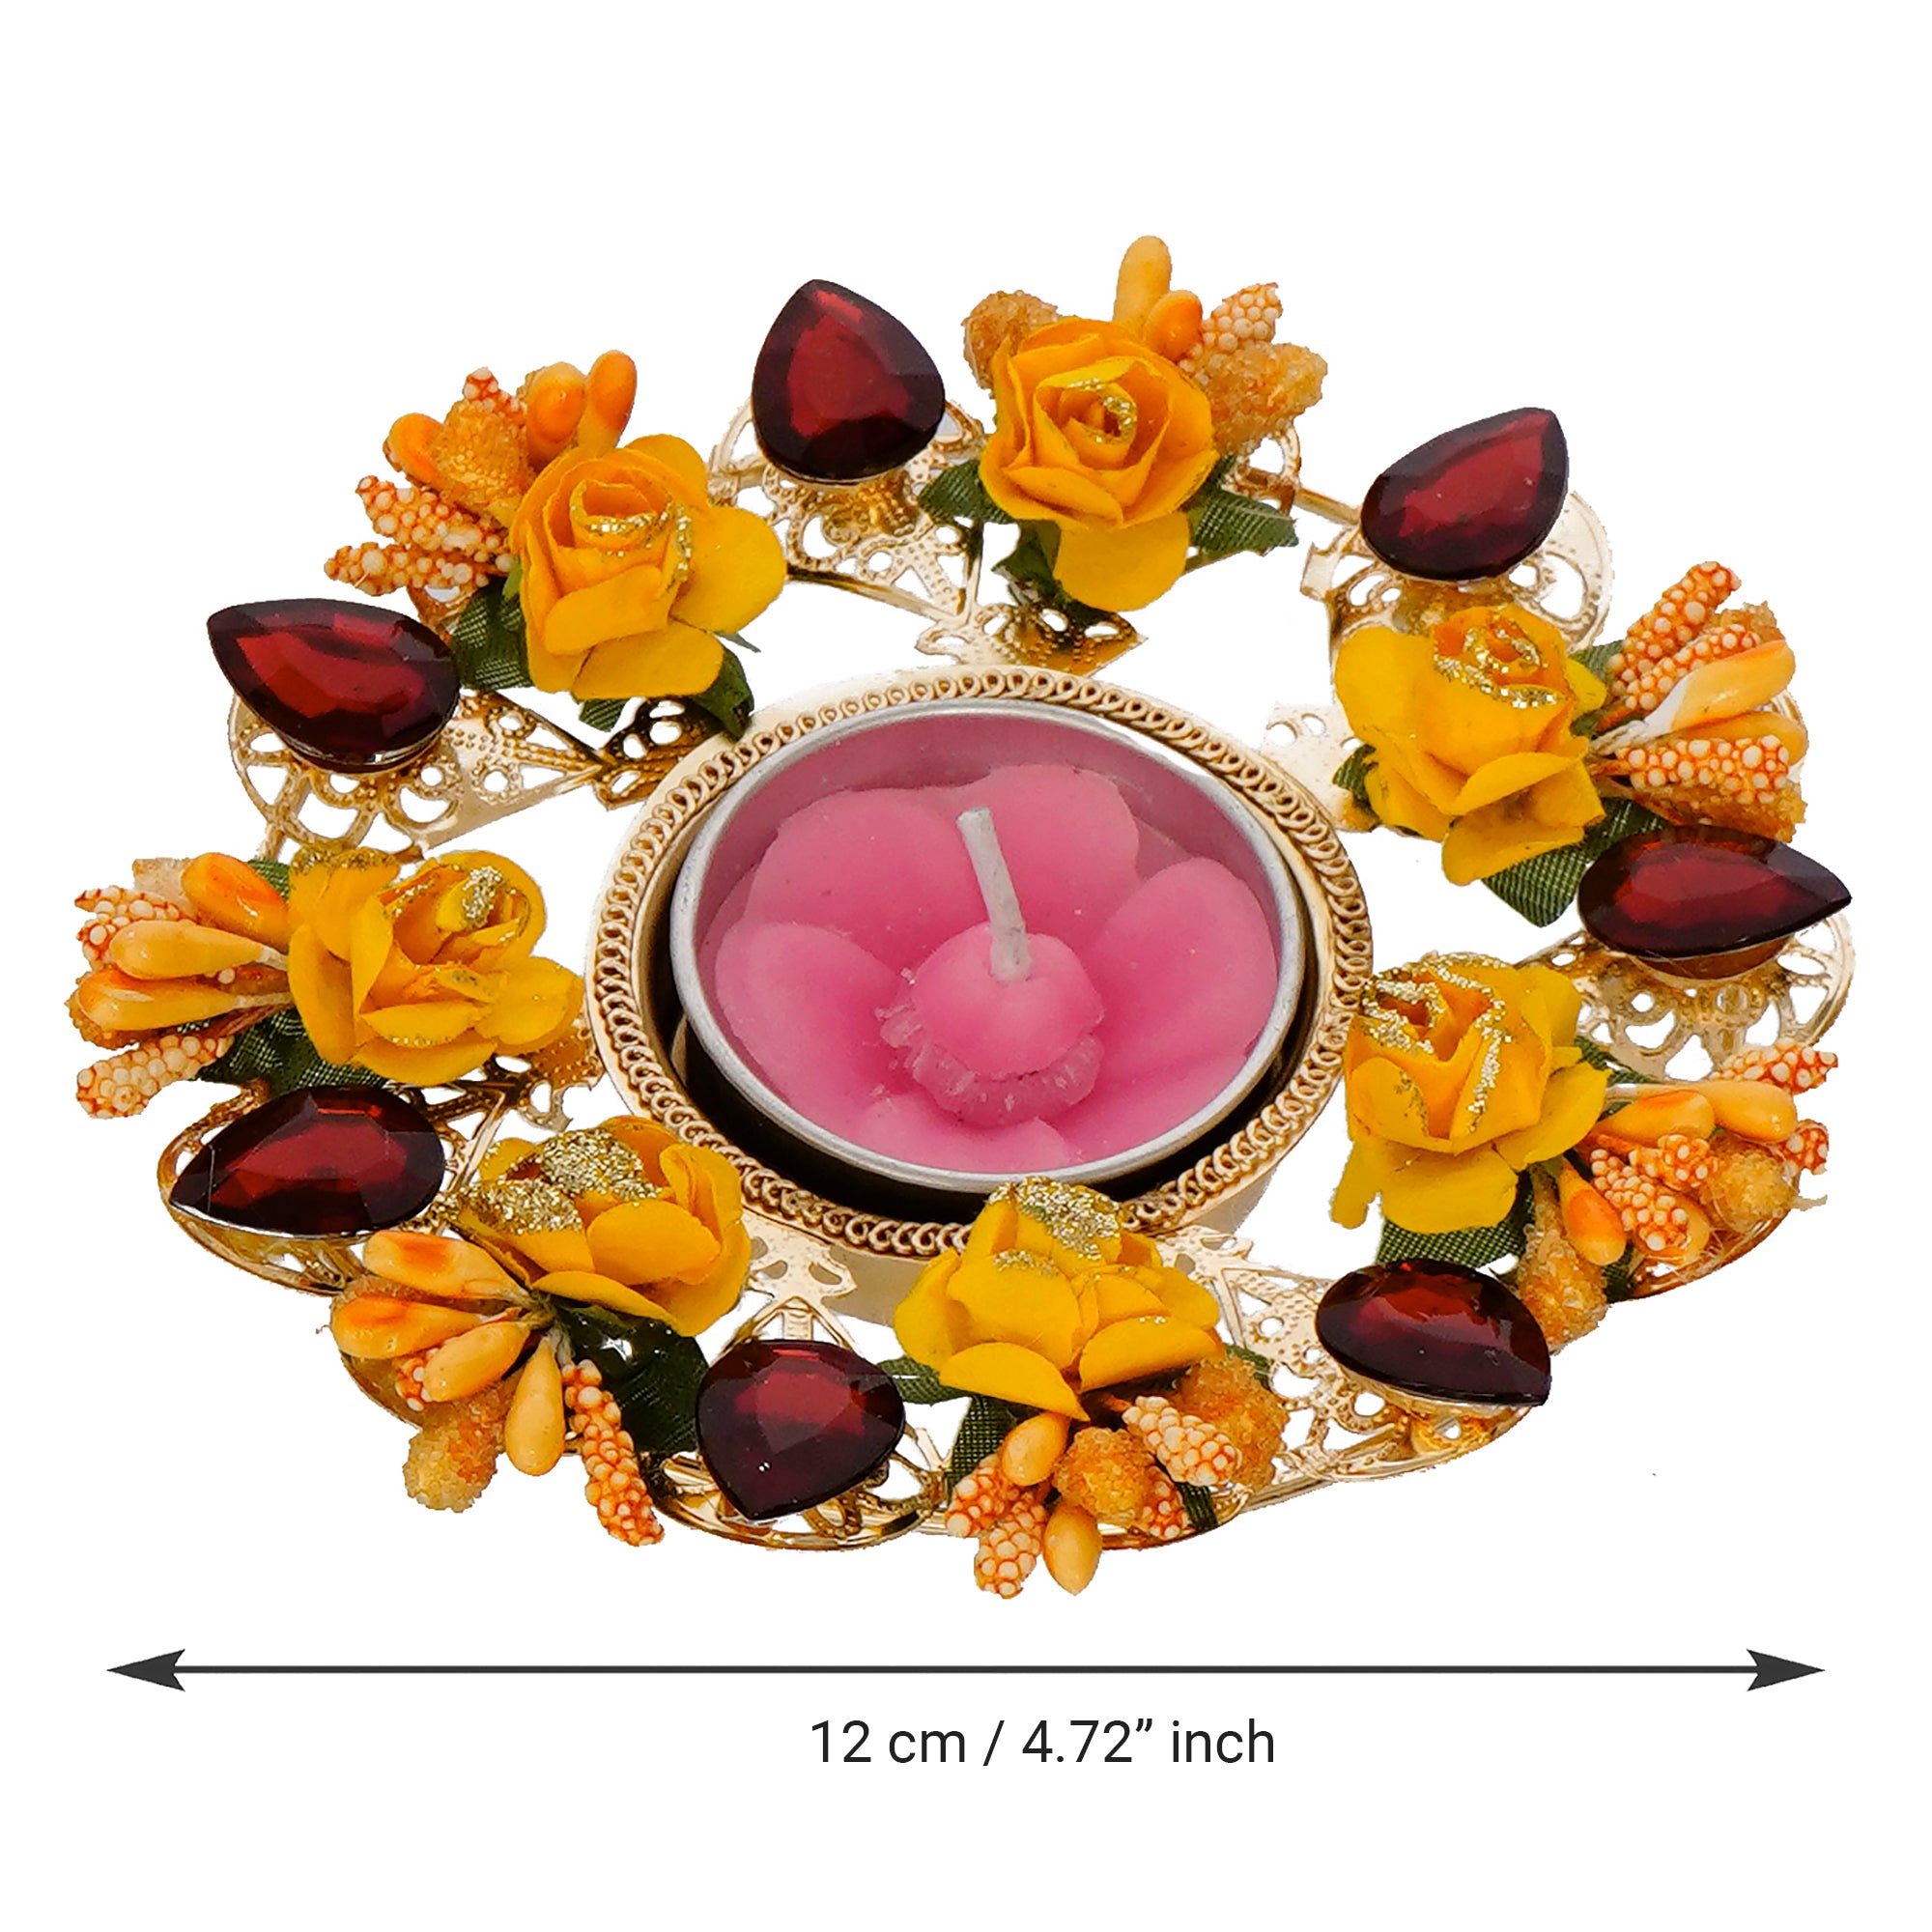 Decorative Handcrafted Yellow and Red Floral Tea Light Holder 3